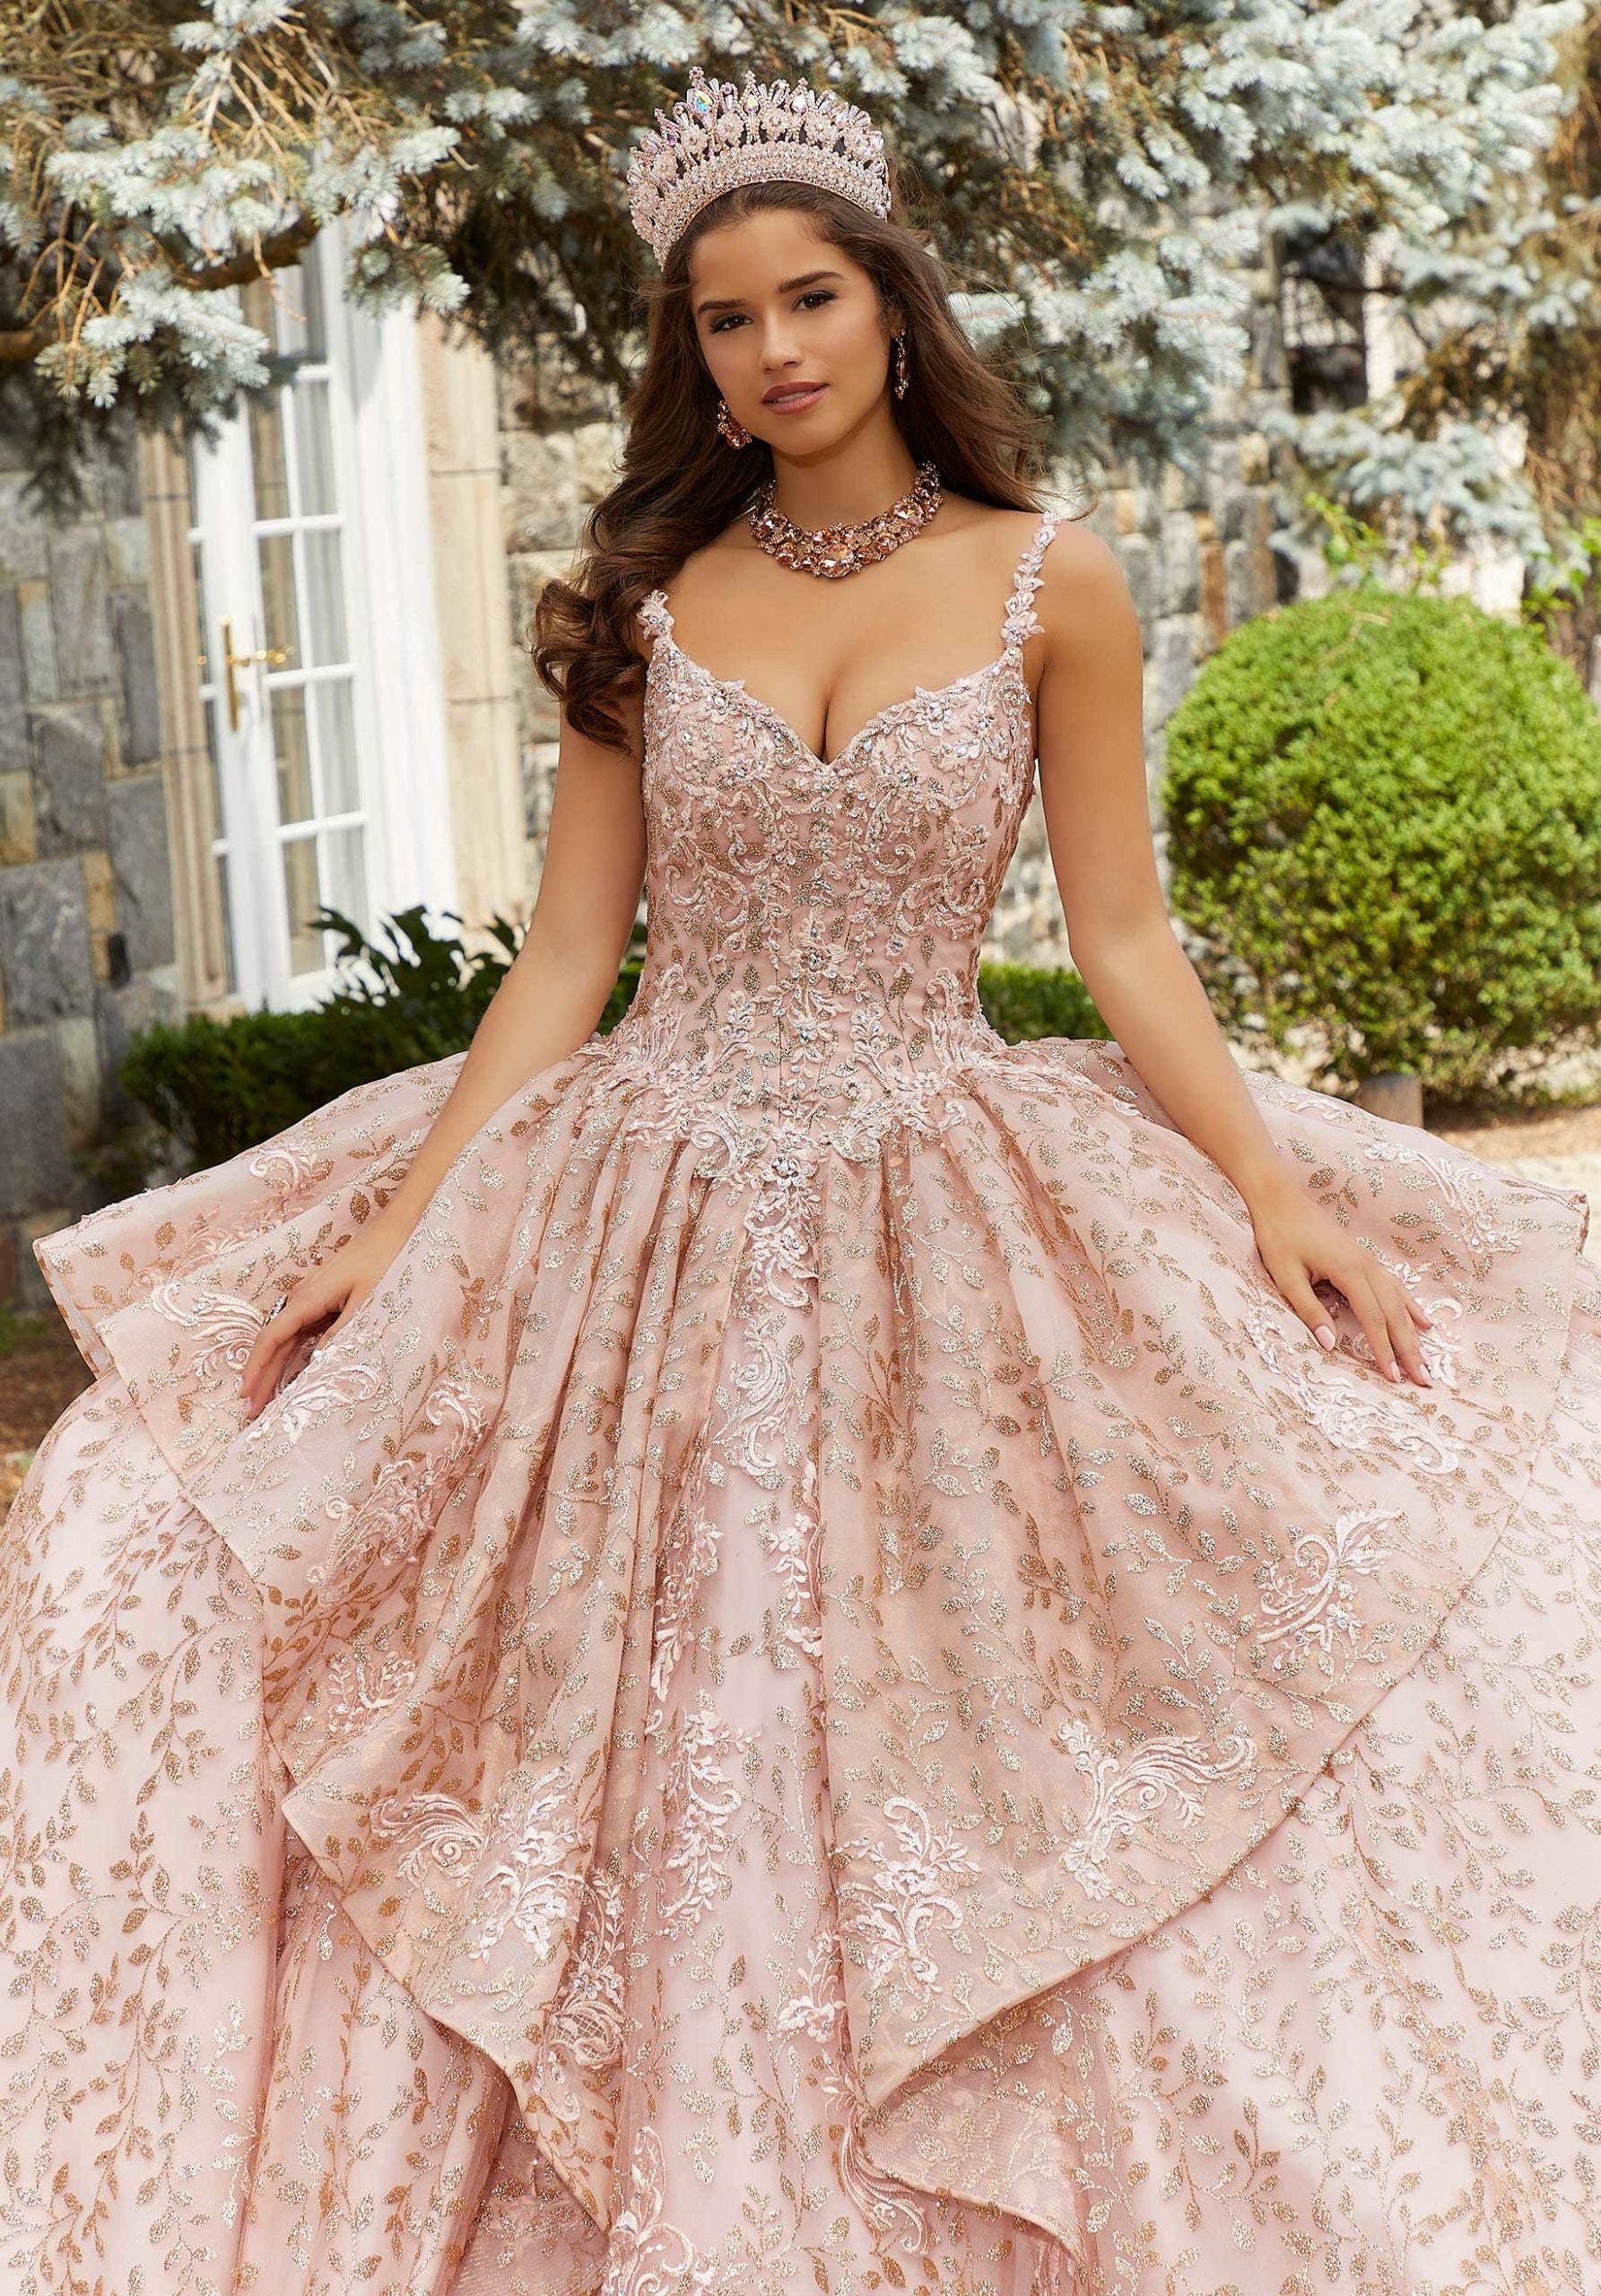 Rhinestone and Crystal Beaded Patterned Glitter Quinceañera Dress